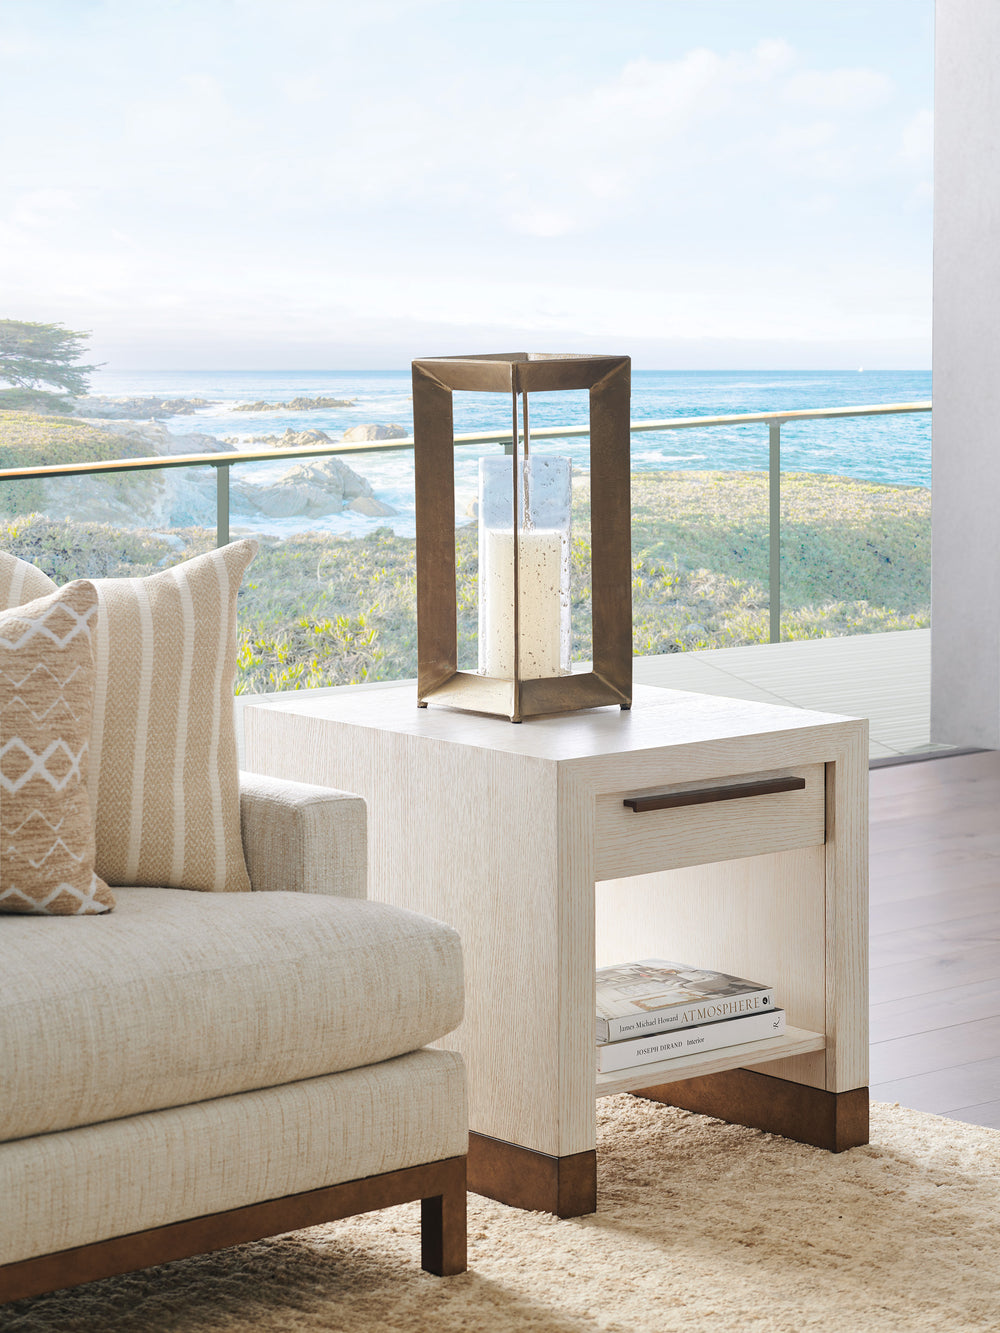 American Home Furniture | Barclay Butera  - Carmel Huckleberry Drawer End Table